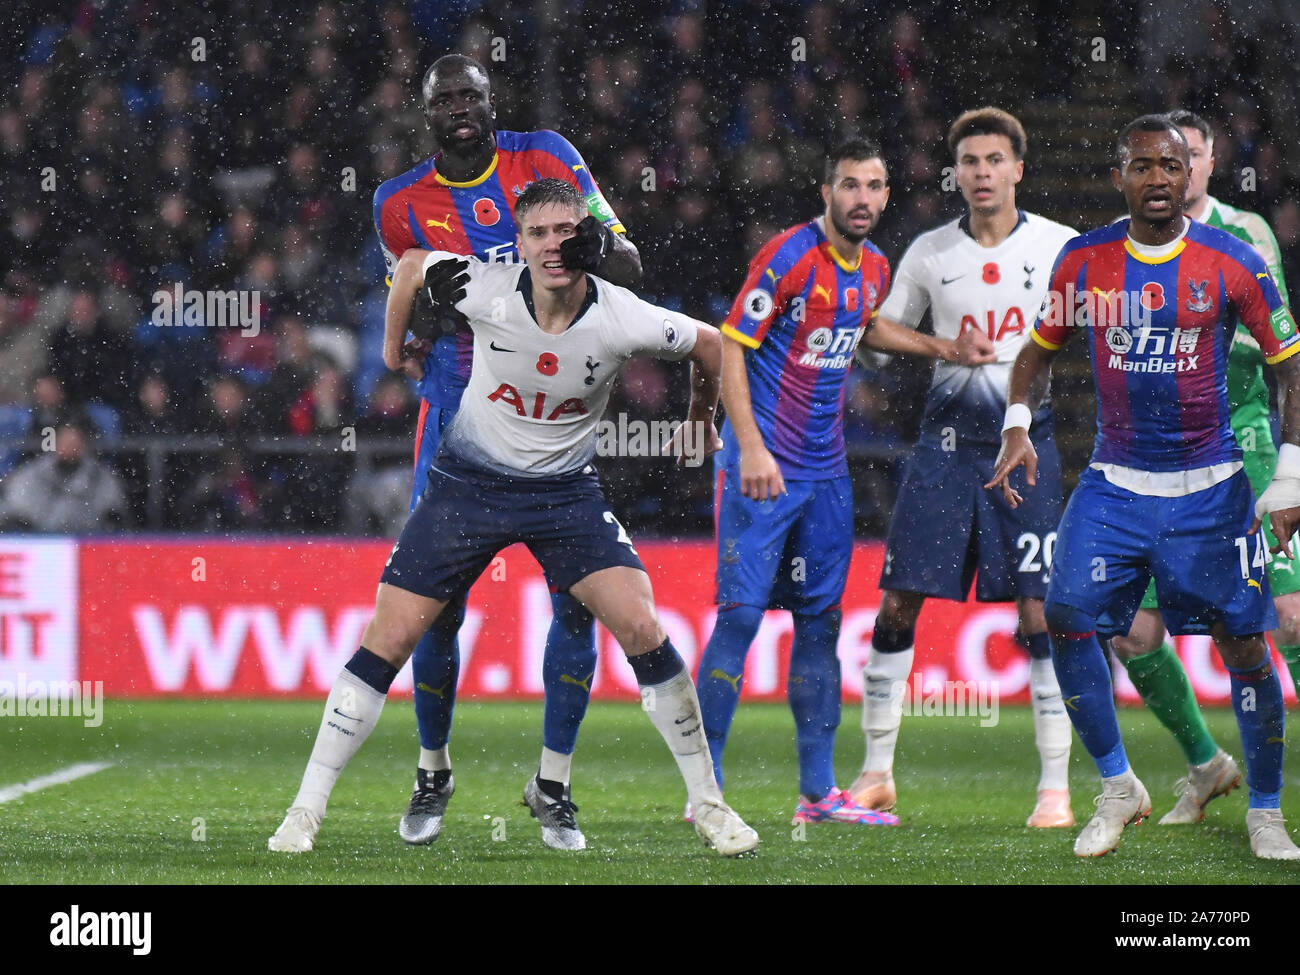 LONDON, ENGLAND - NOVEMBER 10, 2018: Cheikhou Kouyate of Palace and Juan Foyth of Tottenham pictured during the 2018/19 Premier League game between Crystal Palace and Tottenham Hotspur at Selhurst Park. Stock Photo